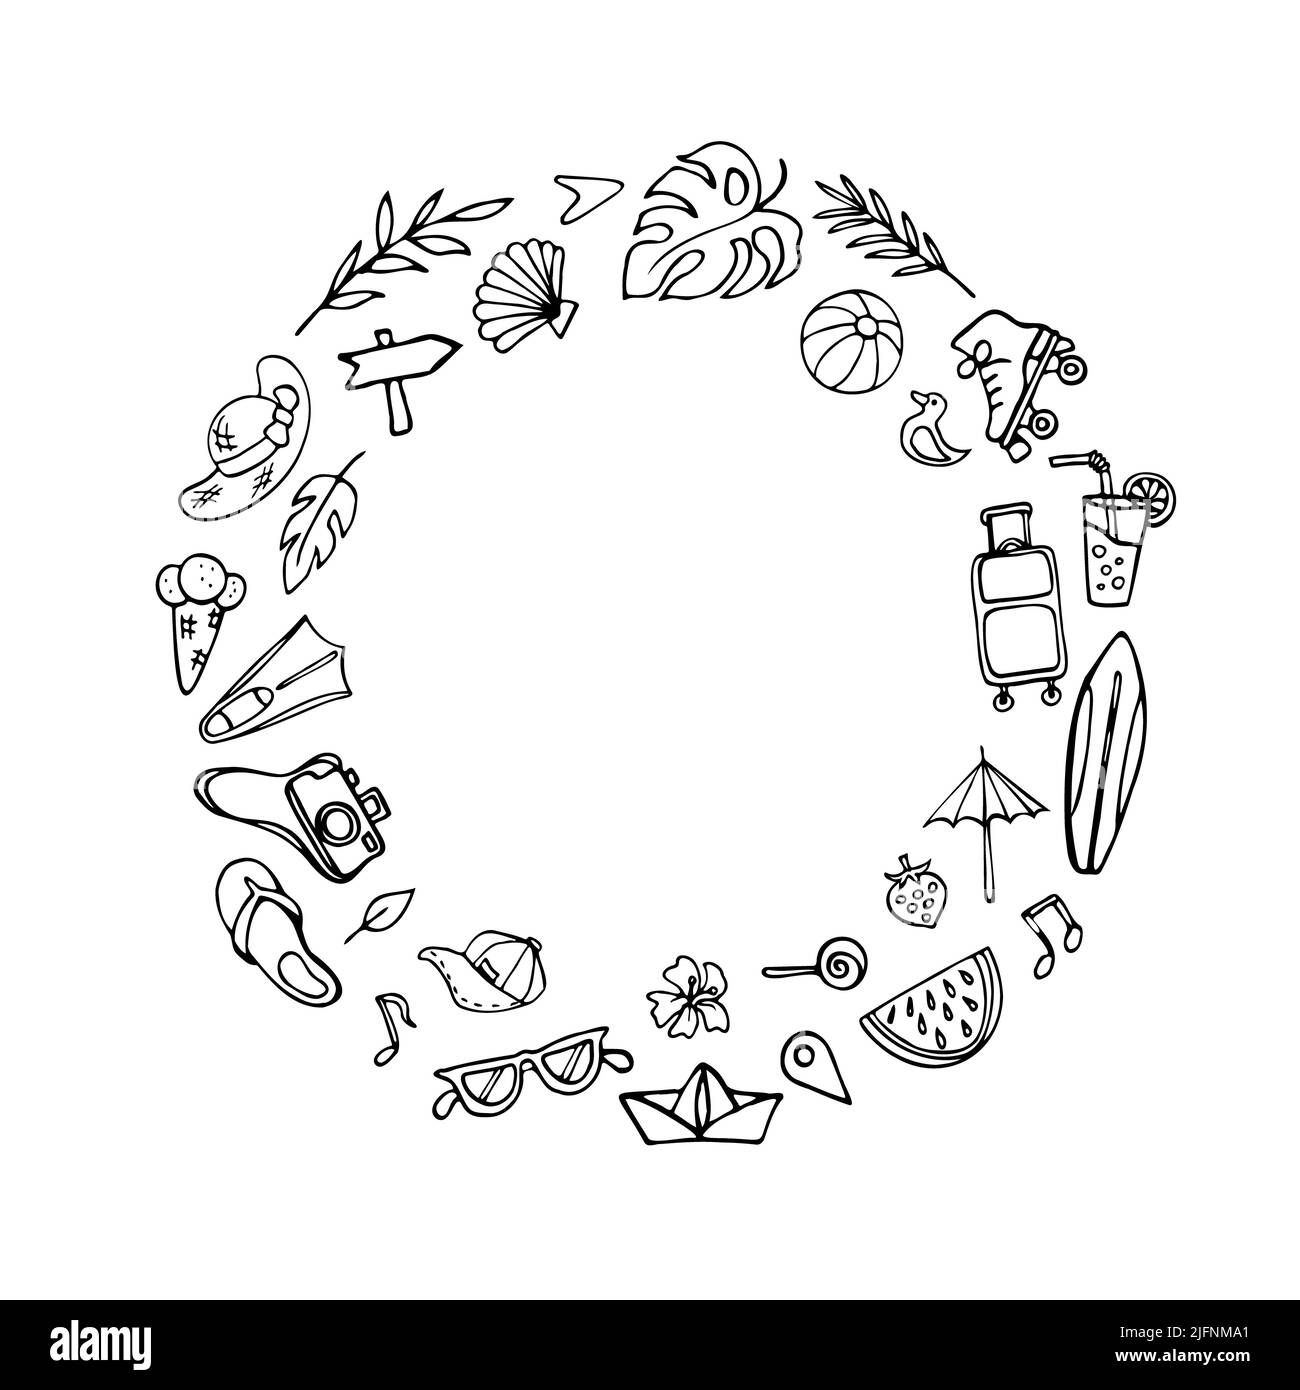 Summertime symbols doodle circle composition with space for text or image. Various vacation objects, cartoon pictures, summer resort theme. Hand drawn Stock Photo